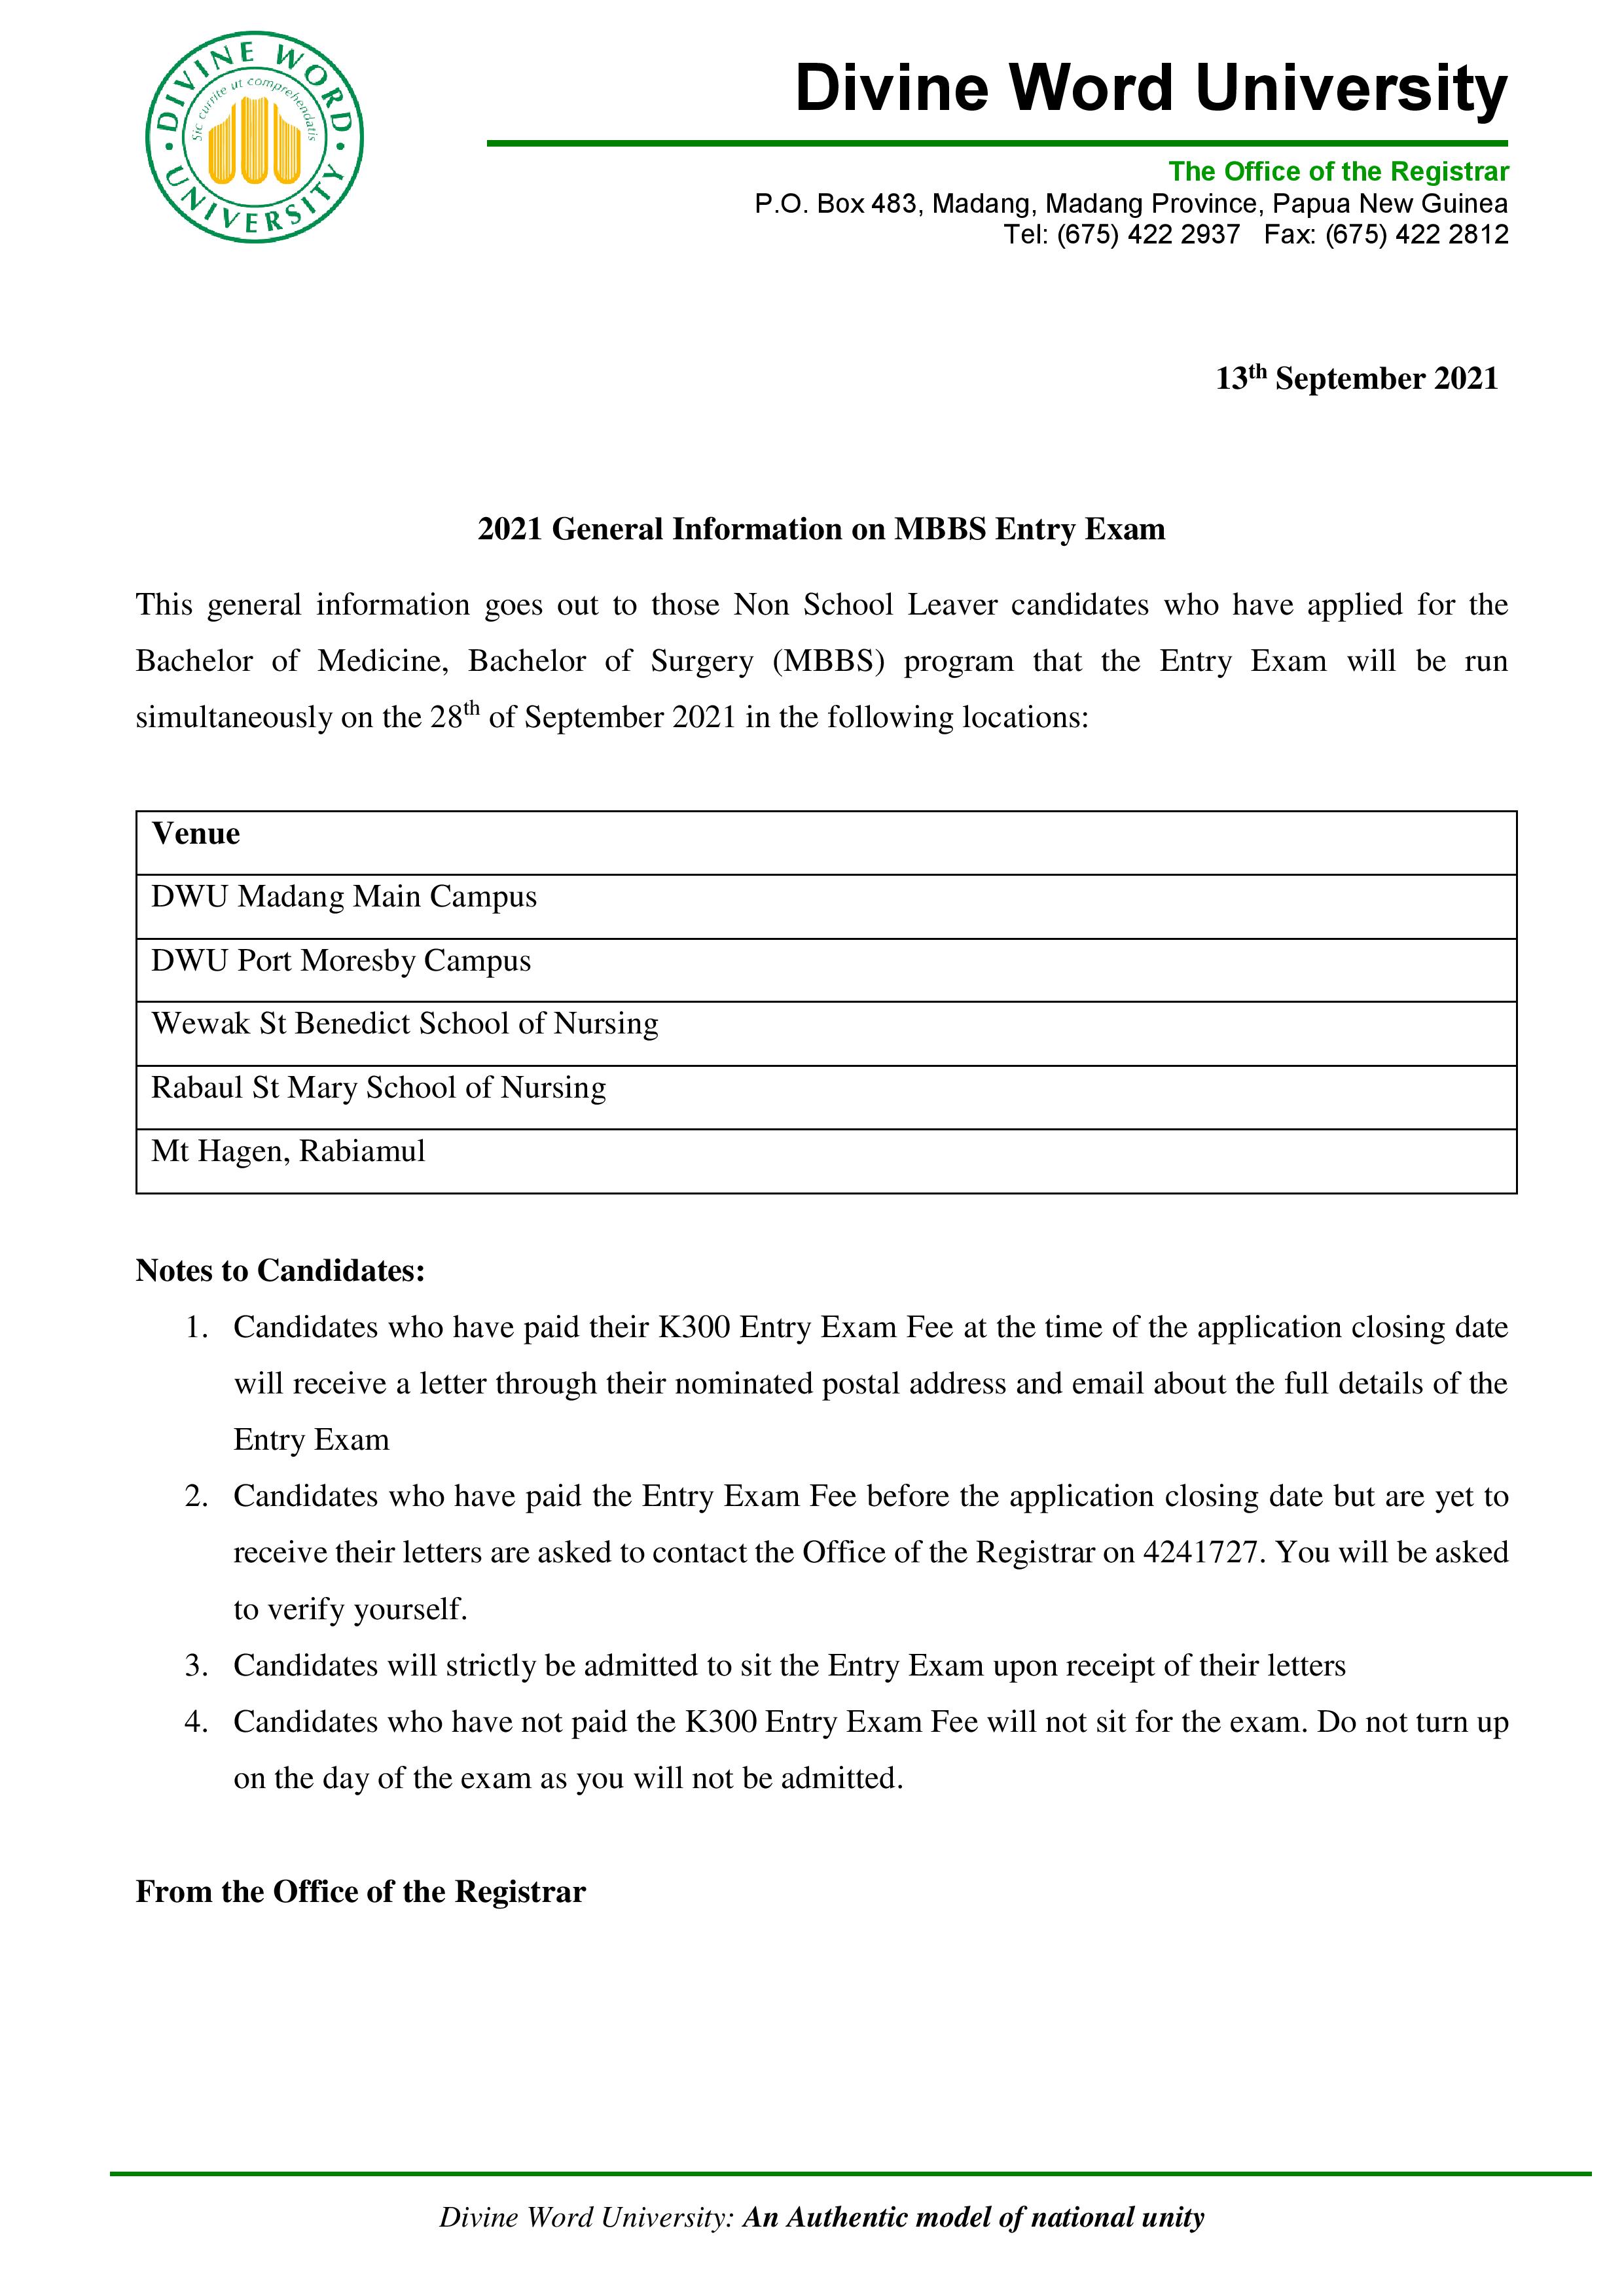 2021 General Information on MBBS Entry Exam page 001